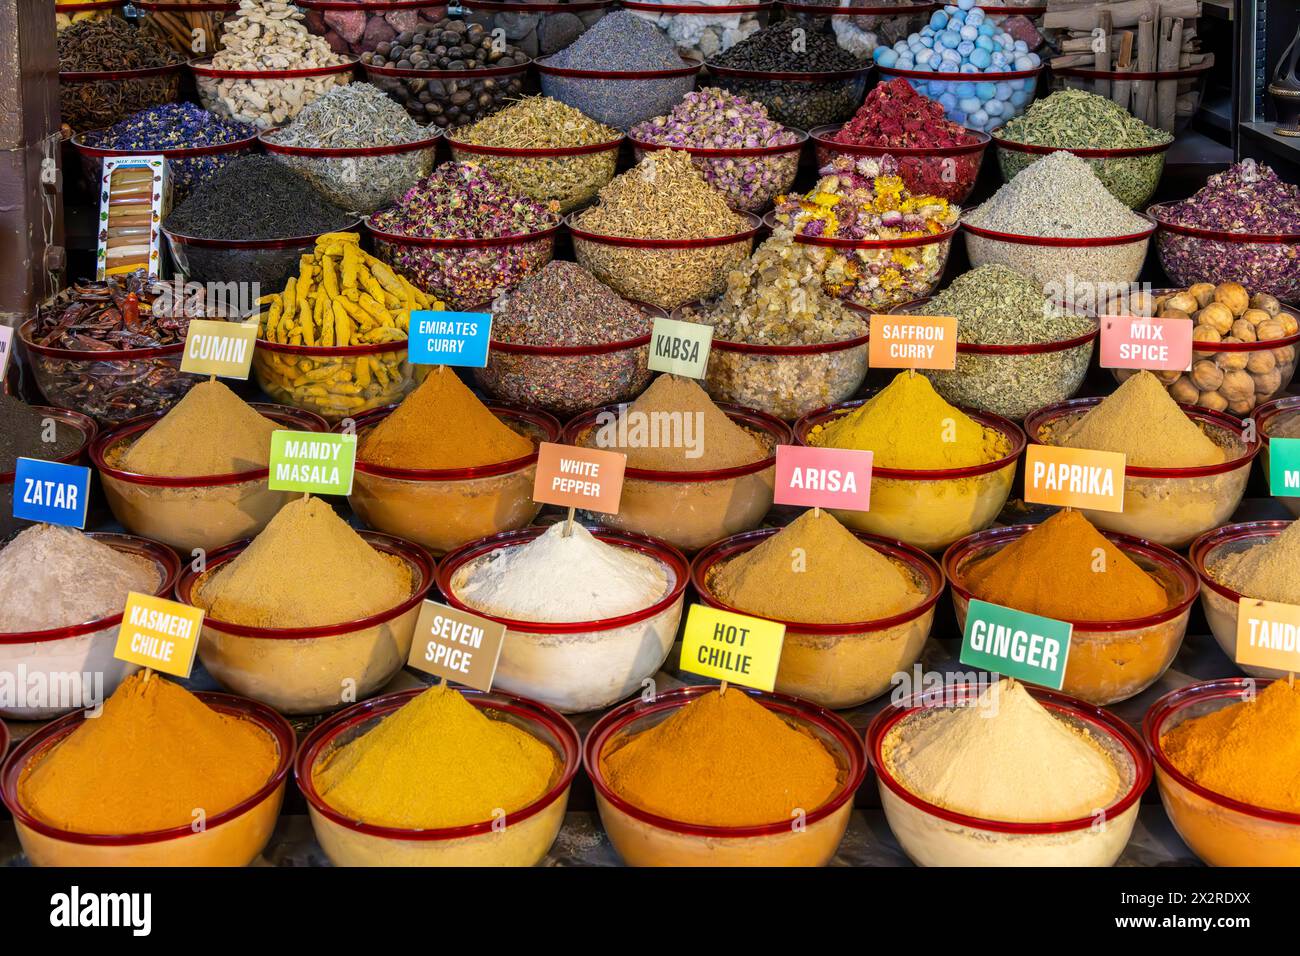 A Variety Of Spices, Herbs, Dried Fruit And Nuts At An Arab Street Market Stall, Dubai , United Arab Emirates, Asia Stock Photo